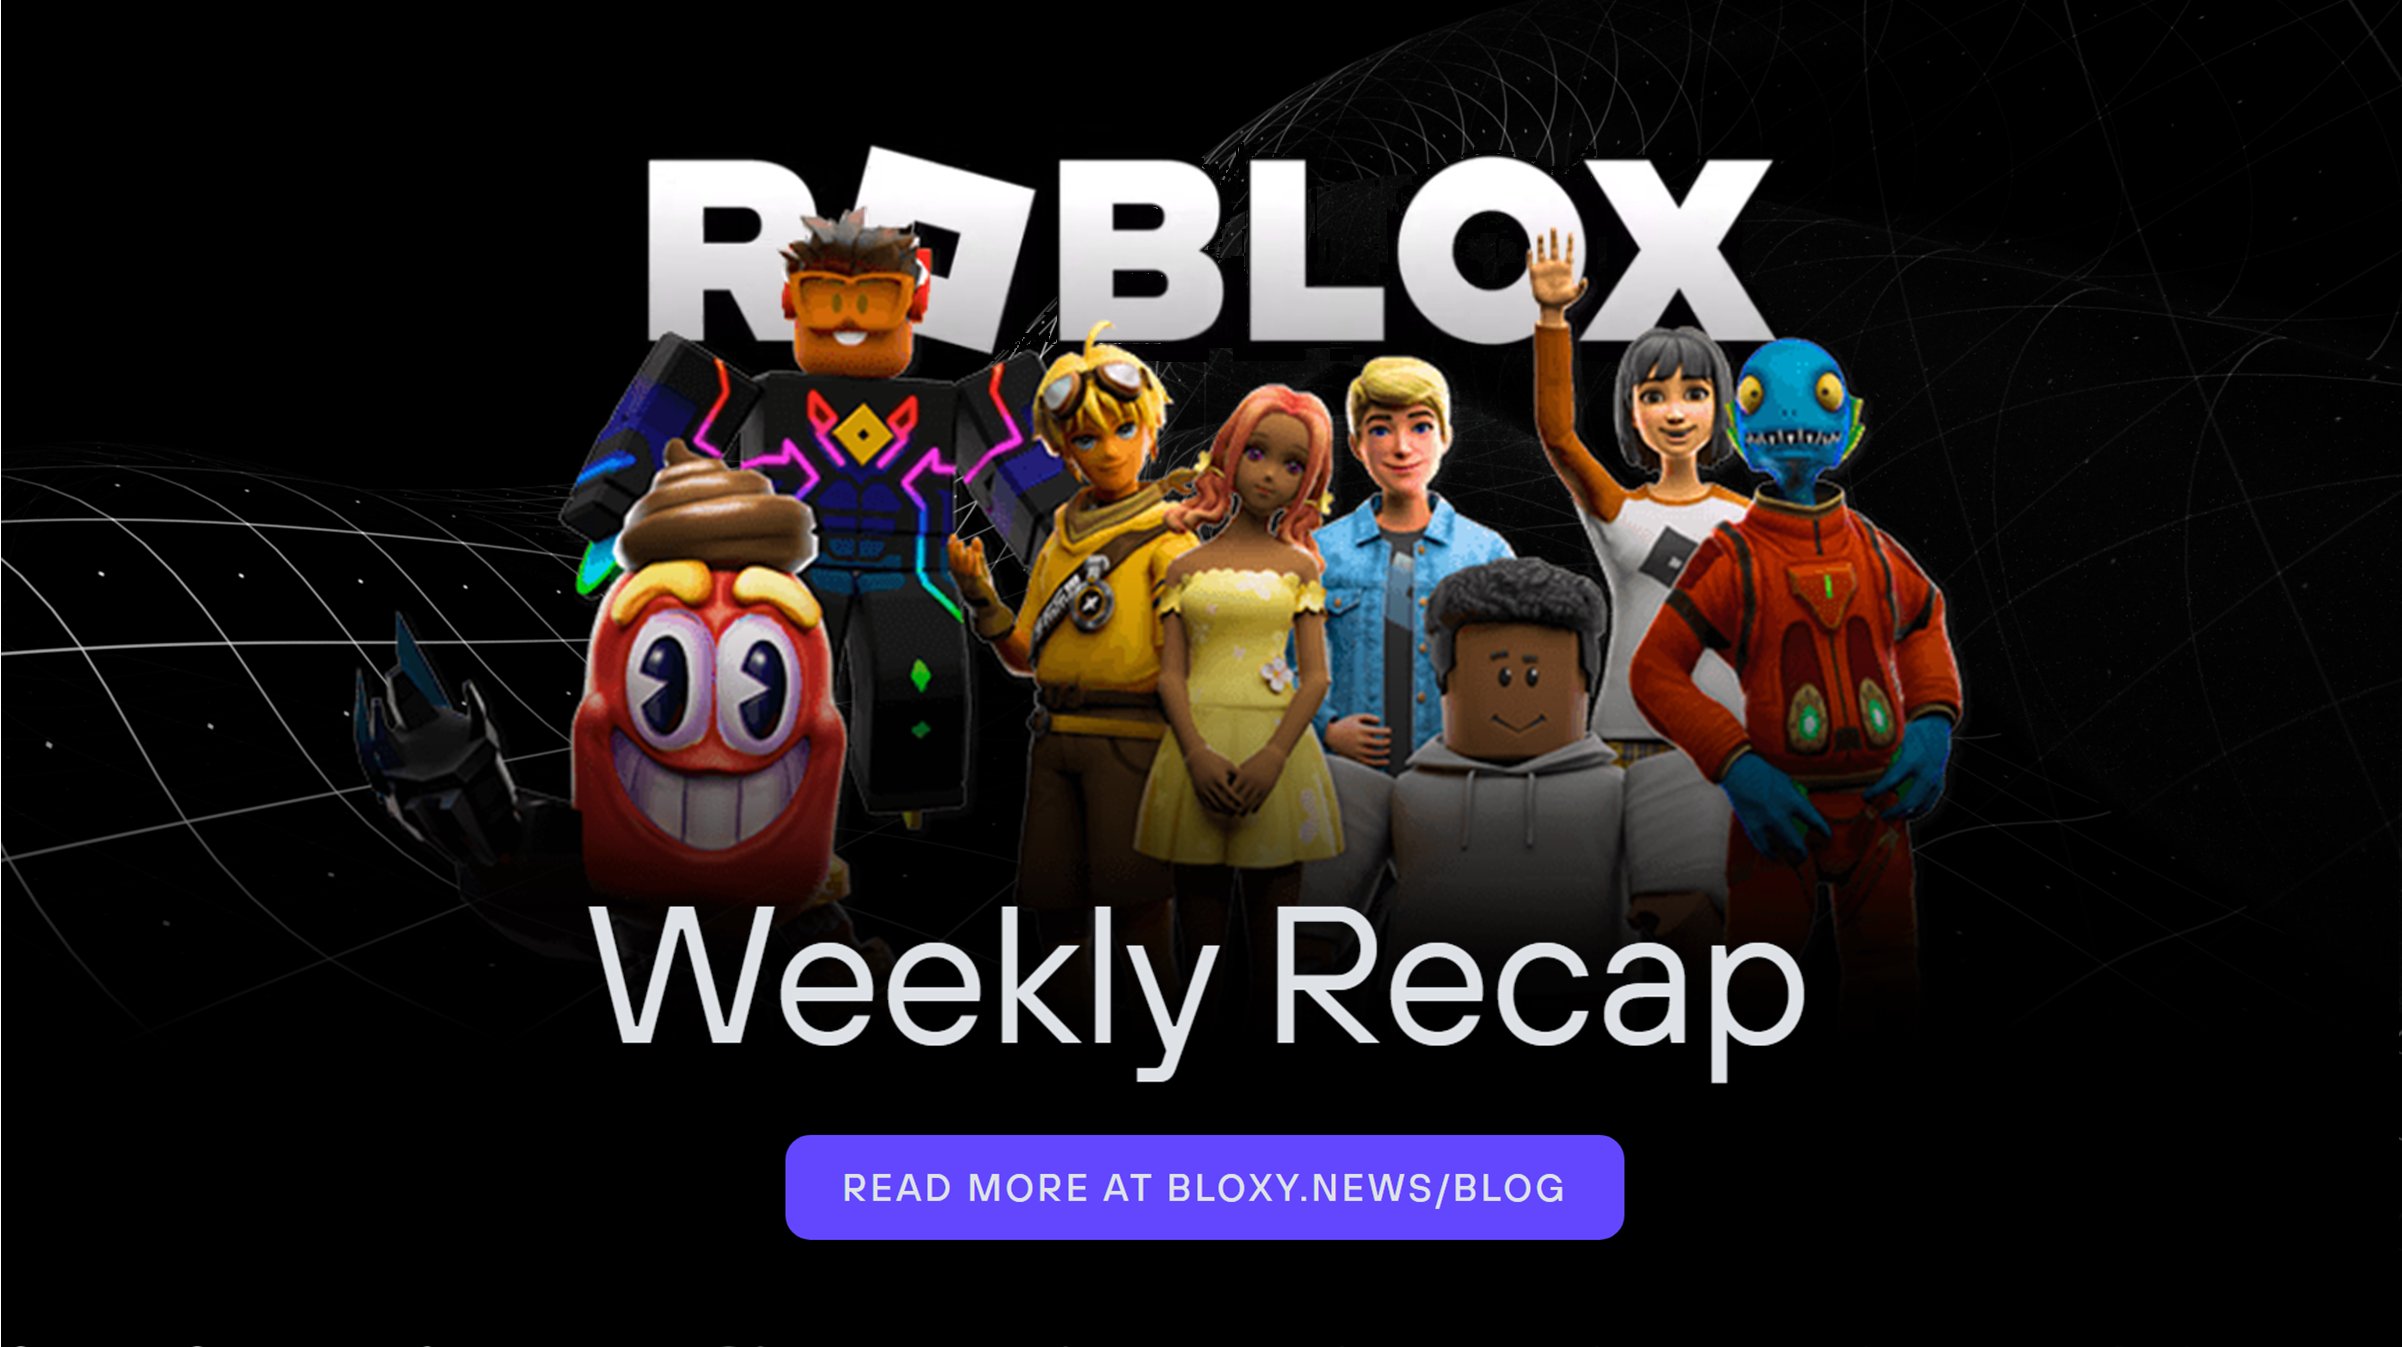 I am providing updates regarding the Roblox outage on my Twitter: twitter.com/Bloxy_News.  Follow me there to receive the latest updates!